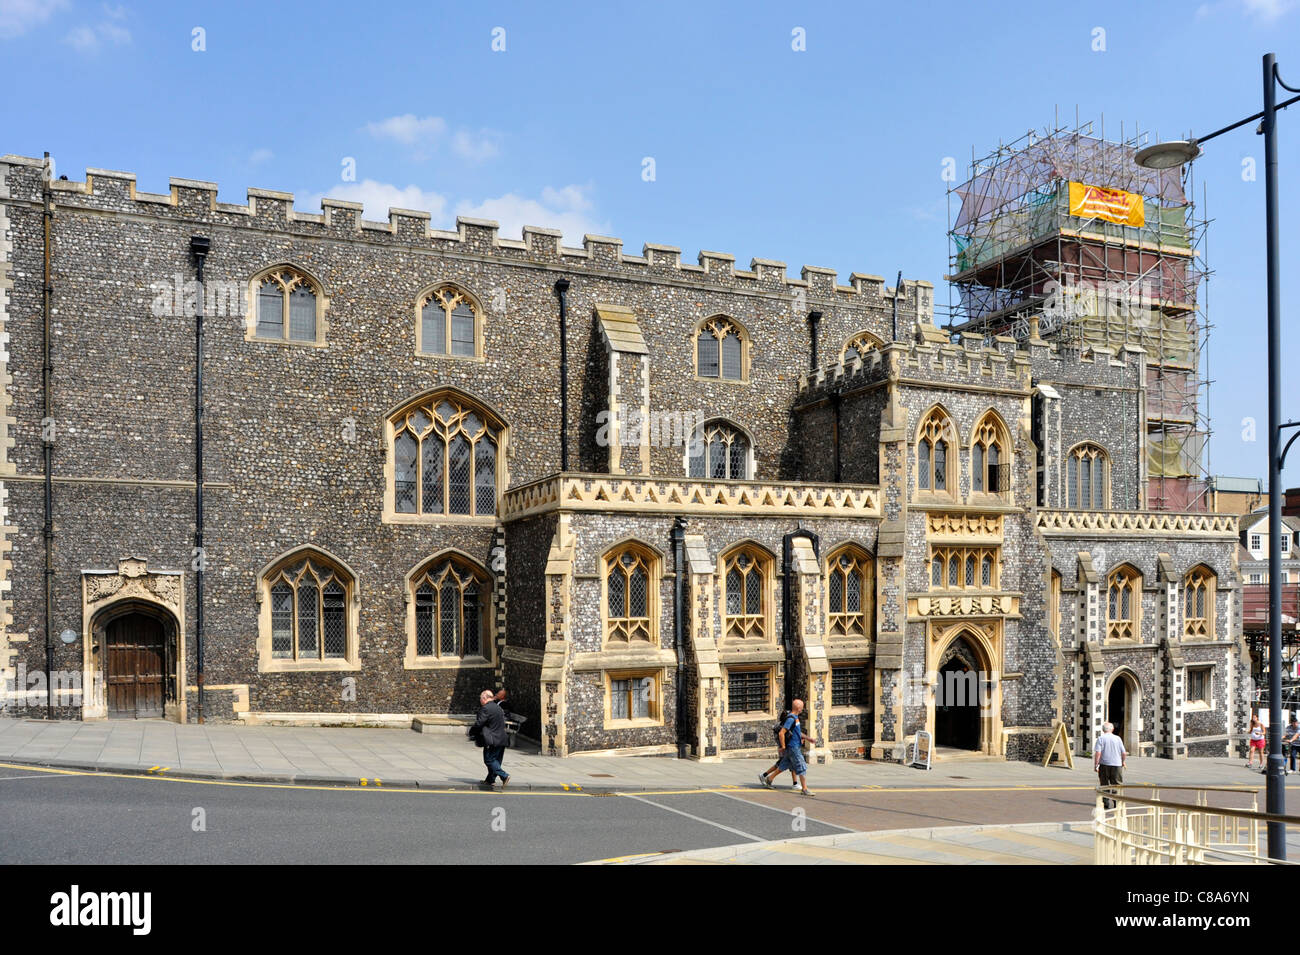 Norwich Guildhall, Inghilterra. Foto Stock